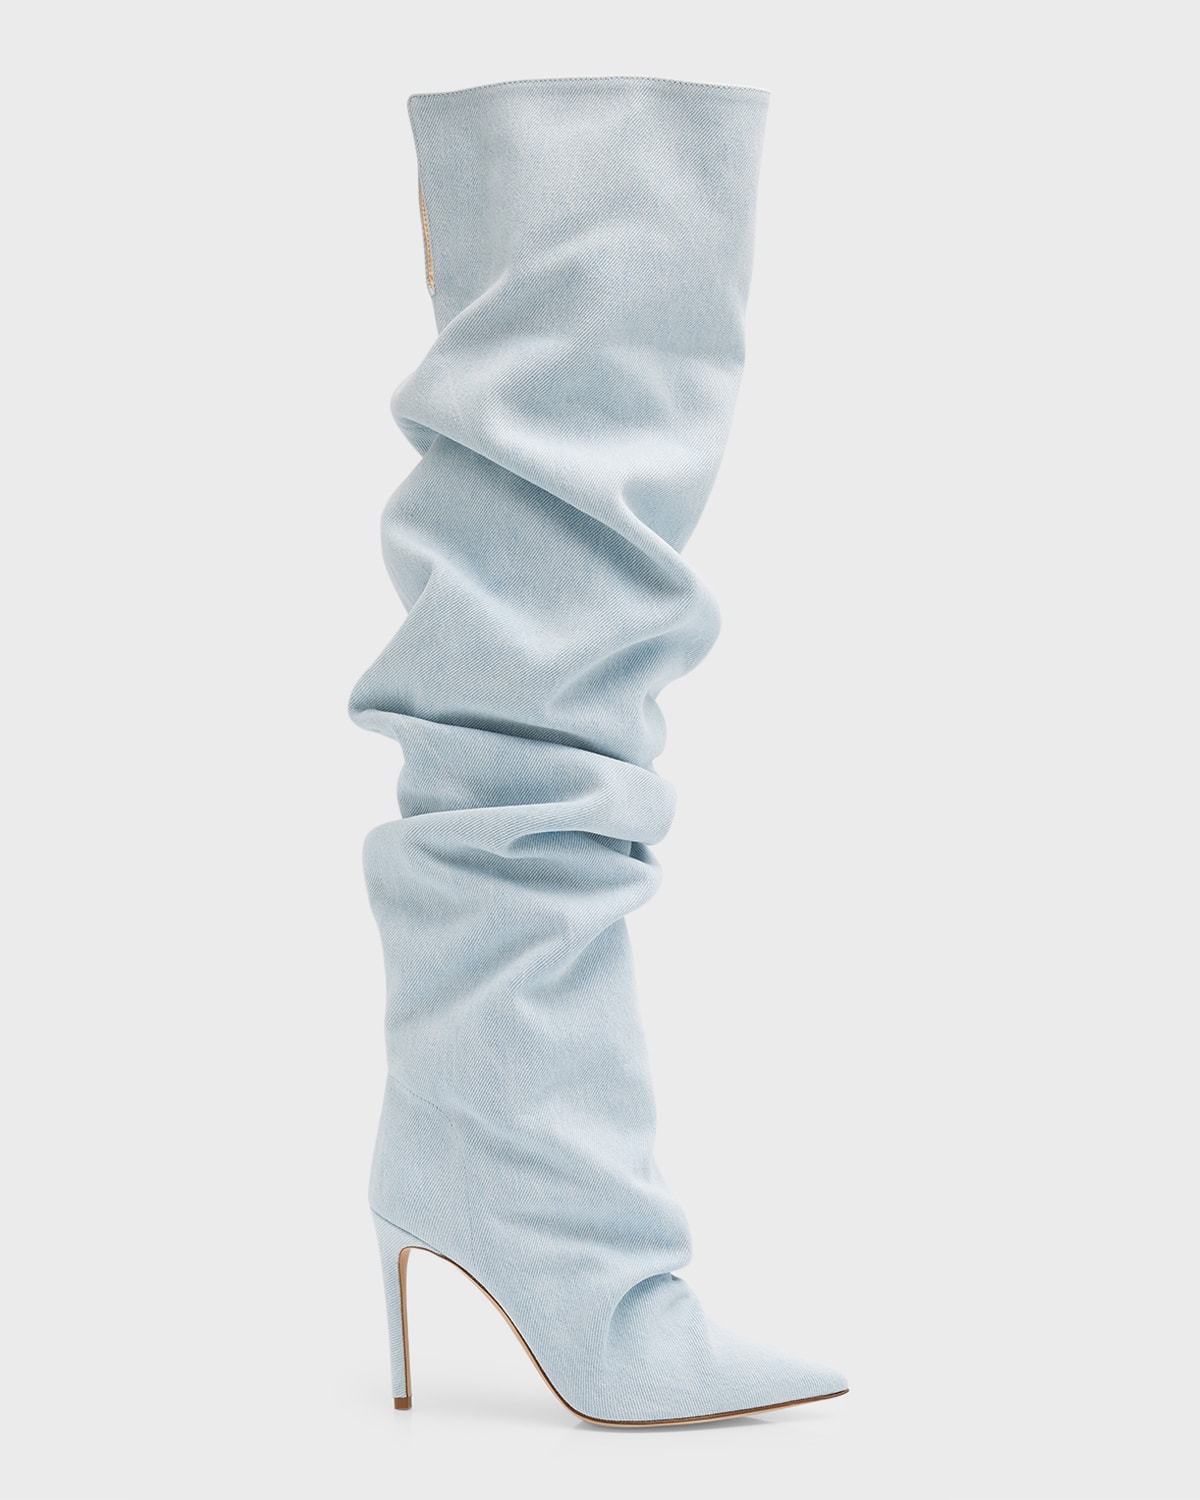 Primavera Recycled Denim Over-The-Knee Boots